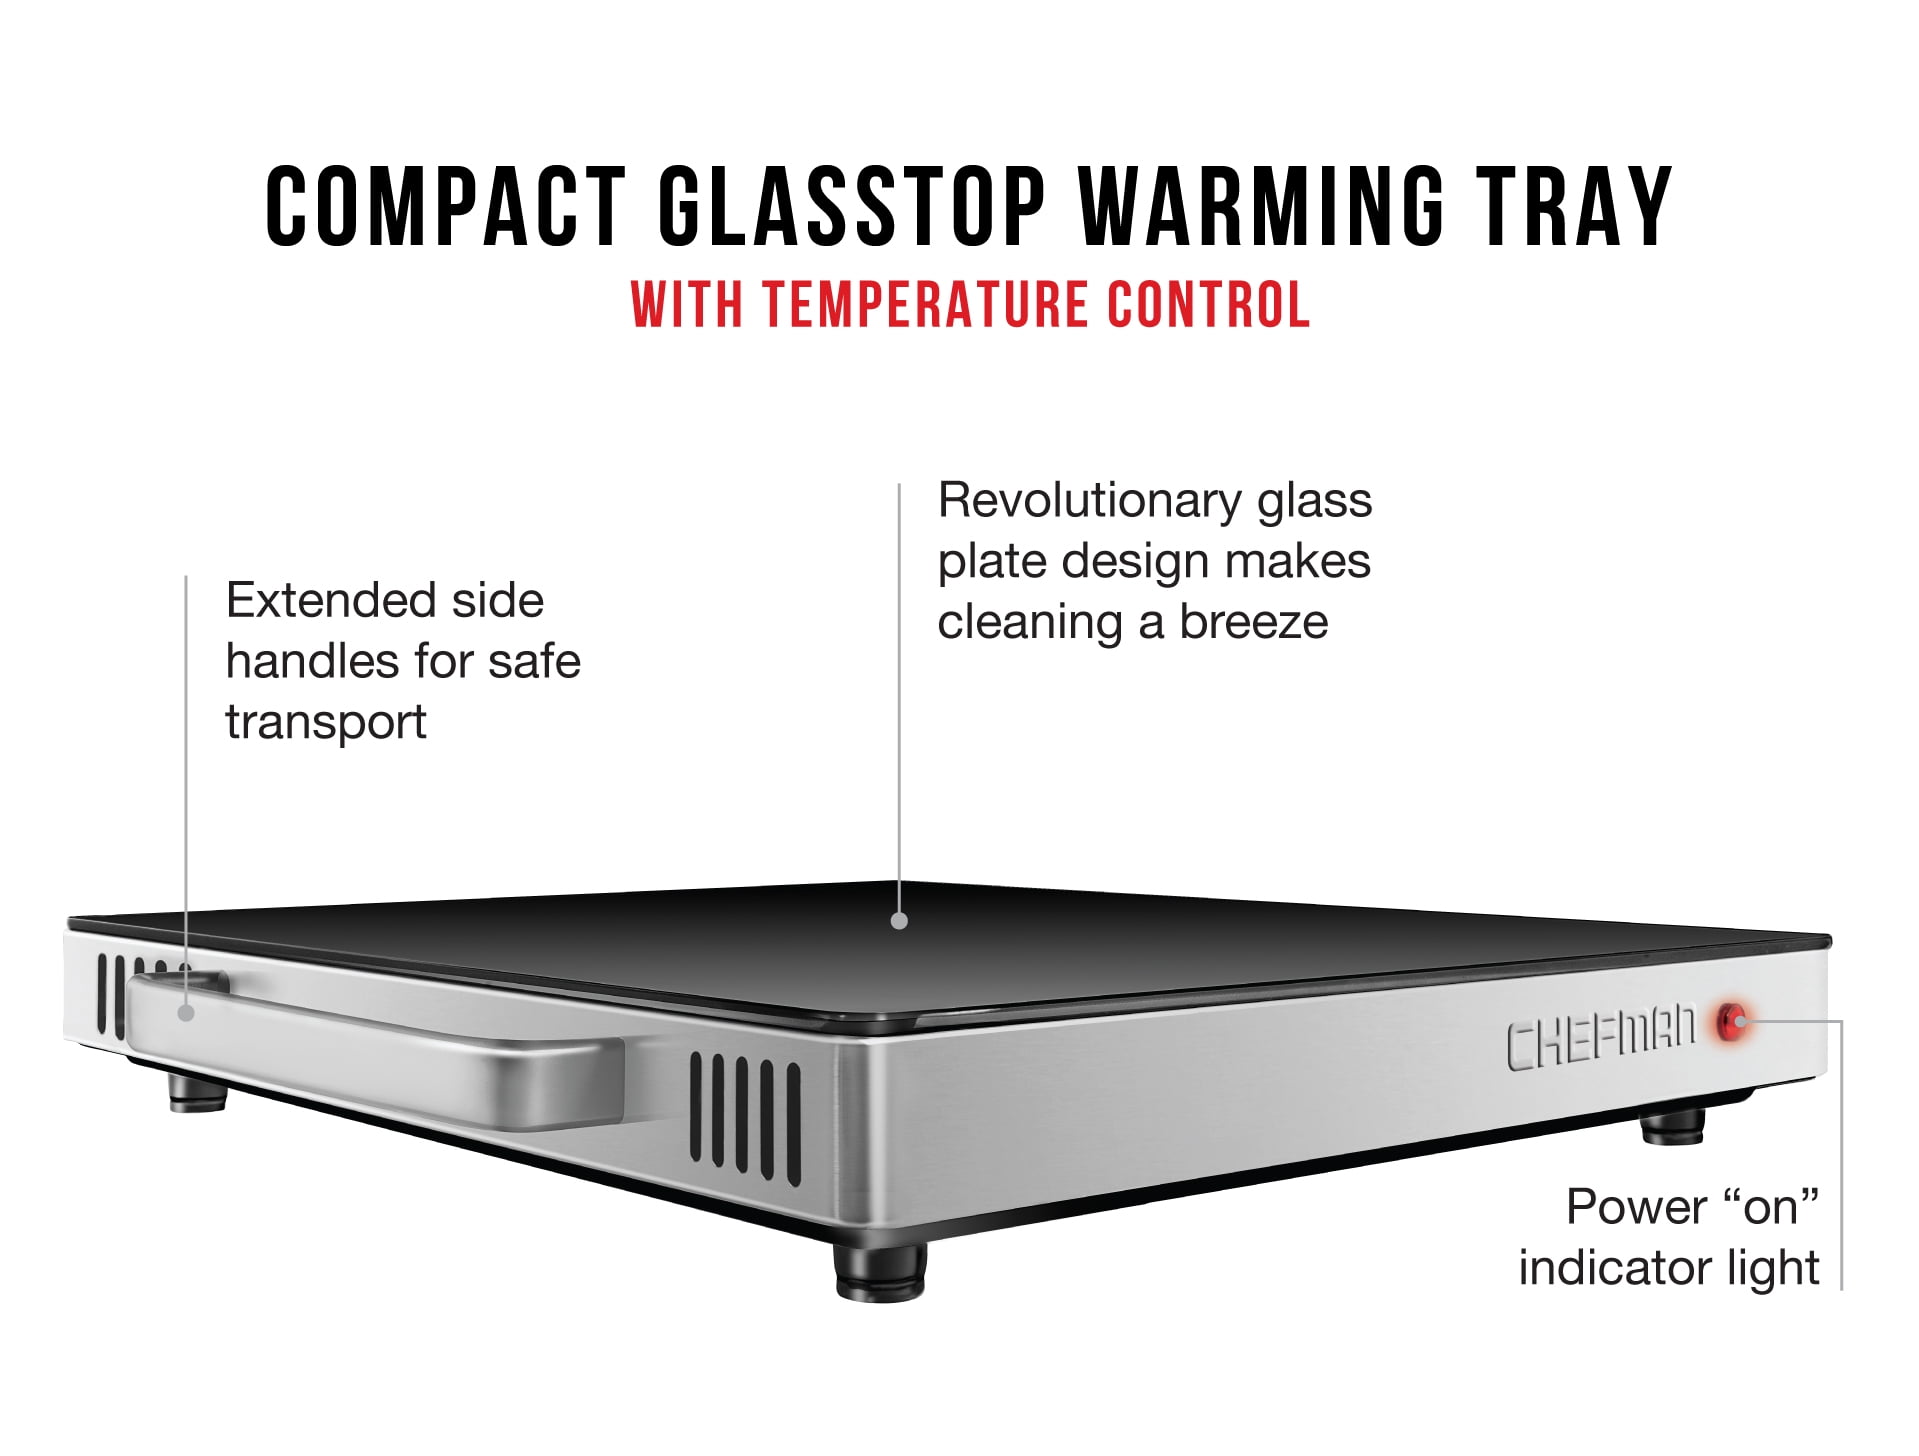 Compact Glasstop Warming Tray @